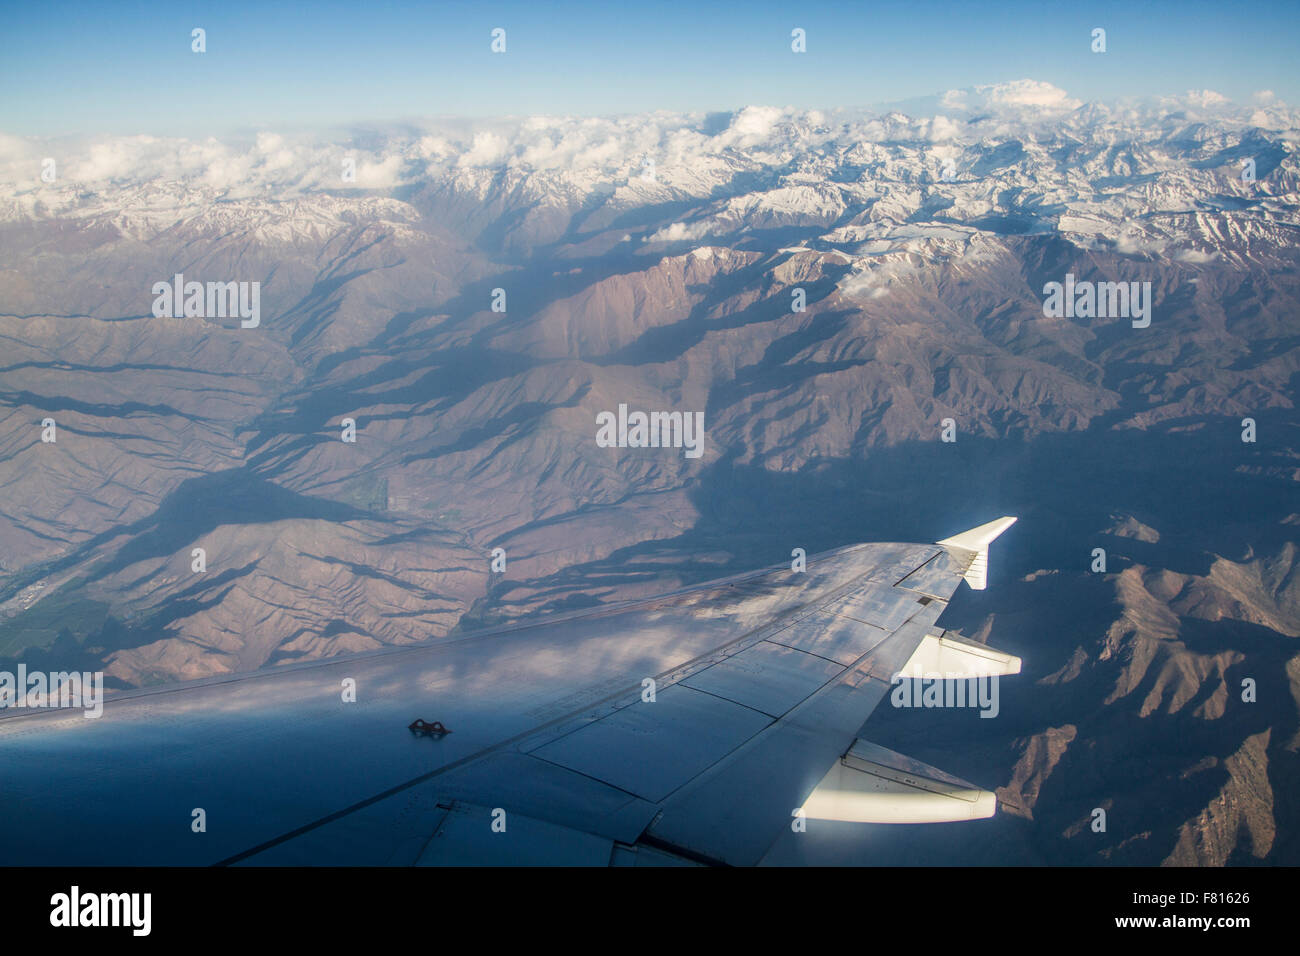 Andes Mountains (Cordillera de los Andes) viewed from an airplane window, near Santiago, Chile. Stock Photo